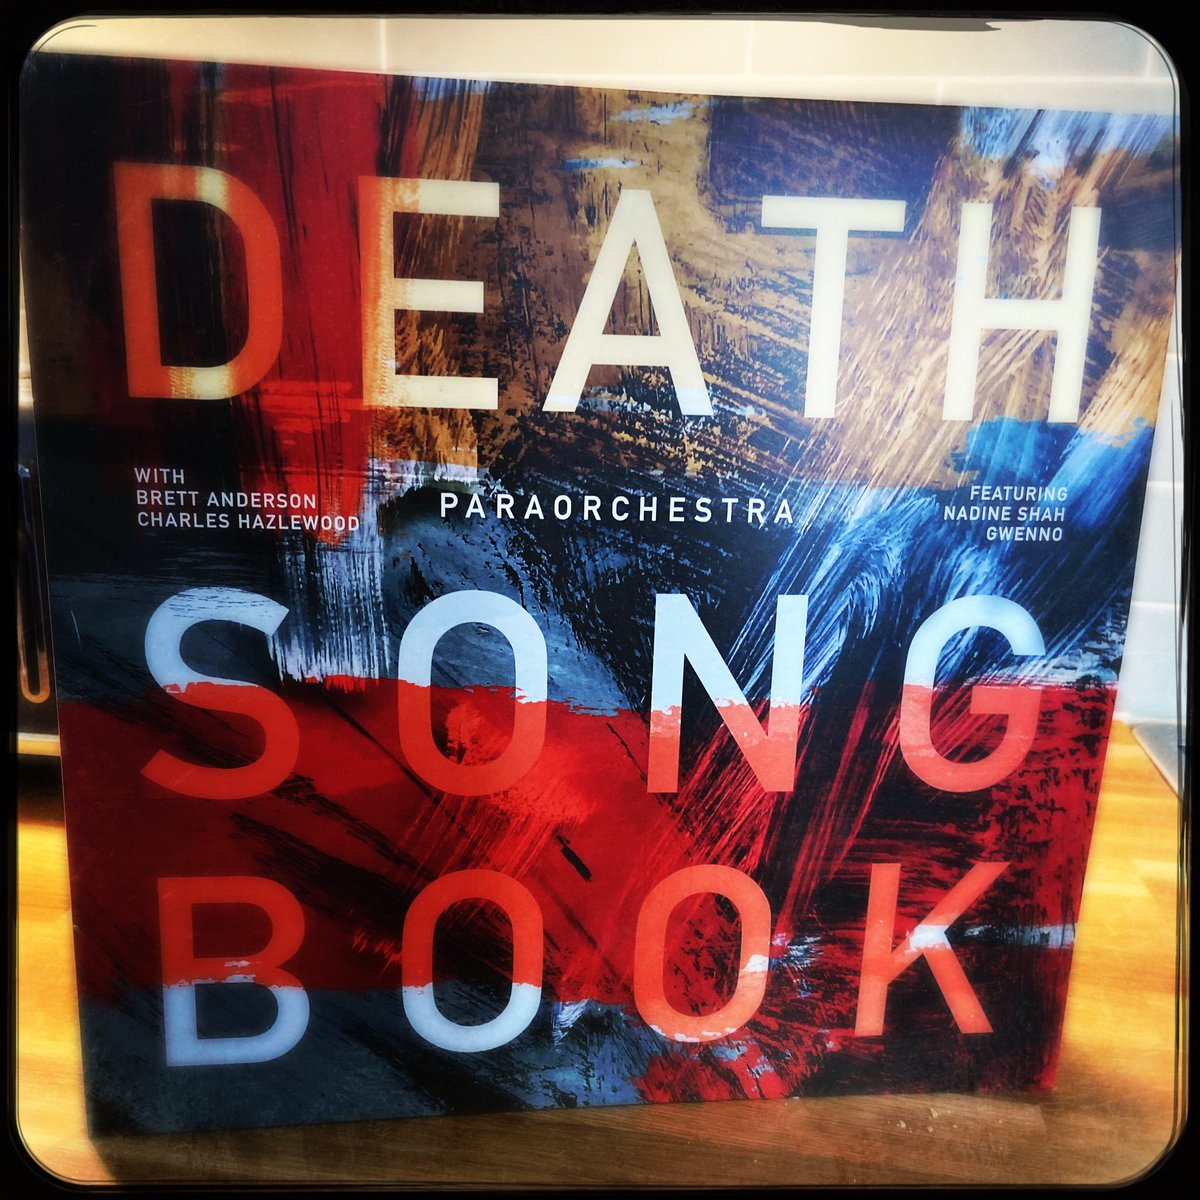 #DeathSongbook was a stand-out lockdown cultural memory when recorded for @SkyArts. The quiet perfection of it on vinyl, though: an hour of emotional alchemy from @ace_southwest #NPO @Paraorchestra @CharlieHazlewoo @BrettAndersonHQ @nadineshah @gwenno - out now via @WorldCircuit